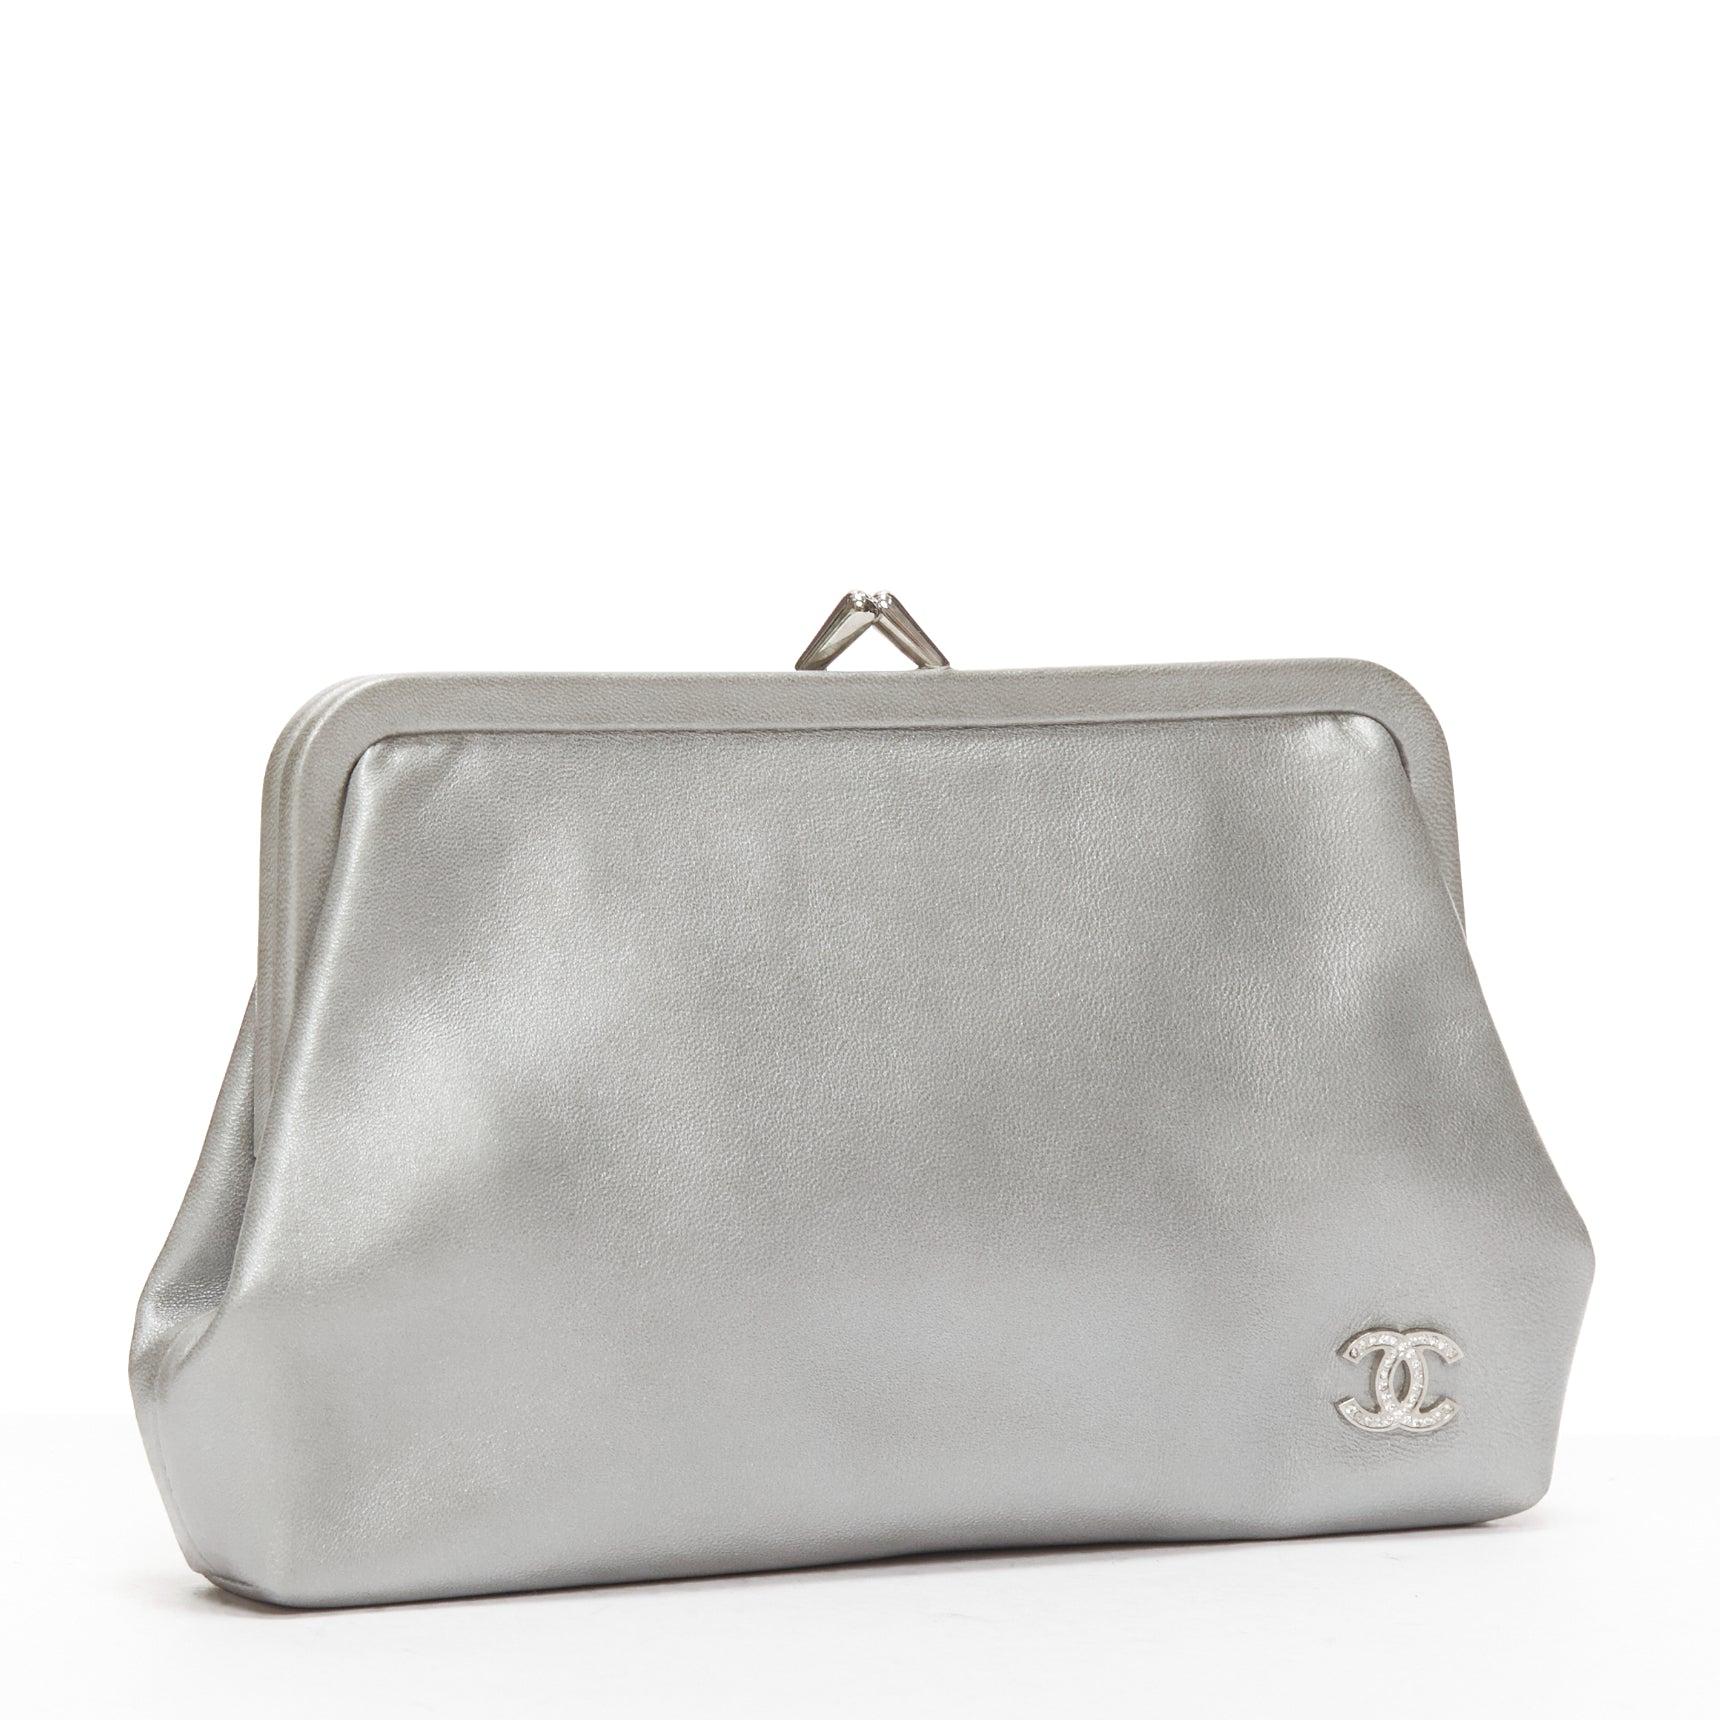 CHANEL grey smooth leather CC crystal logo silver kisslock small pouch
Reference: AAWC/A00999
Brand: Chanel
Material: Leather
Color: Silver, Grey
Pattern: Crystals
Closure: Kiss Lock
Lining: Grey Leather
Extra Details: This clutch does not have a